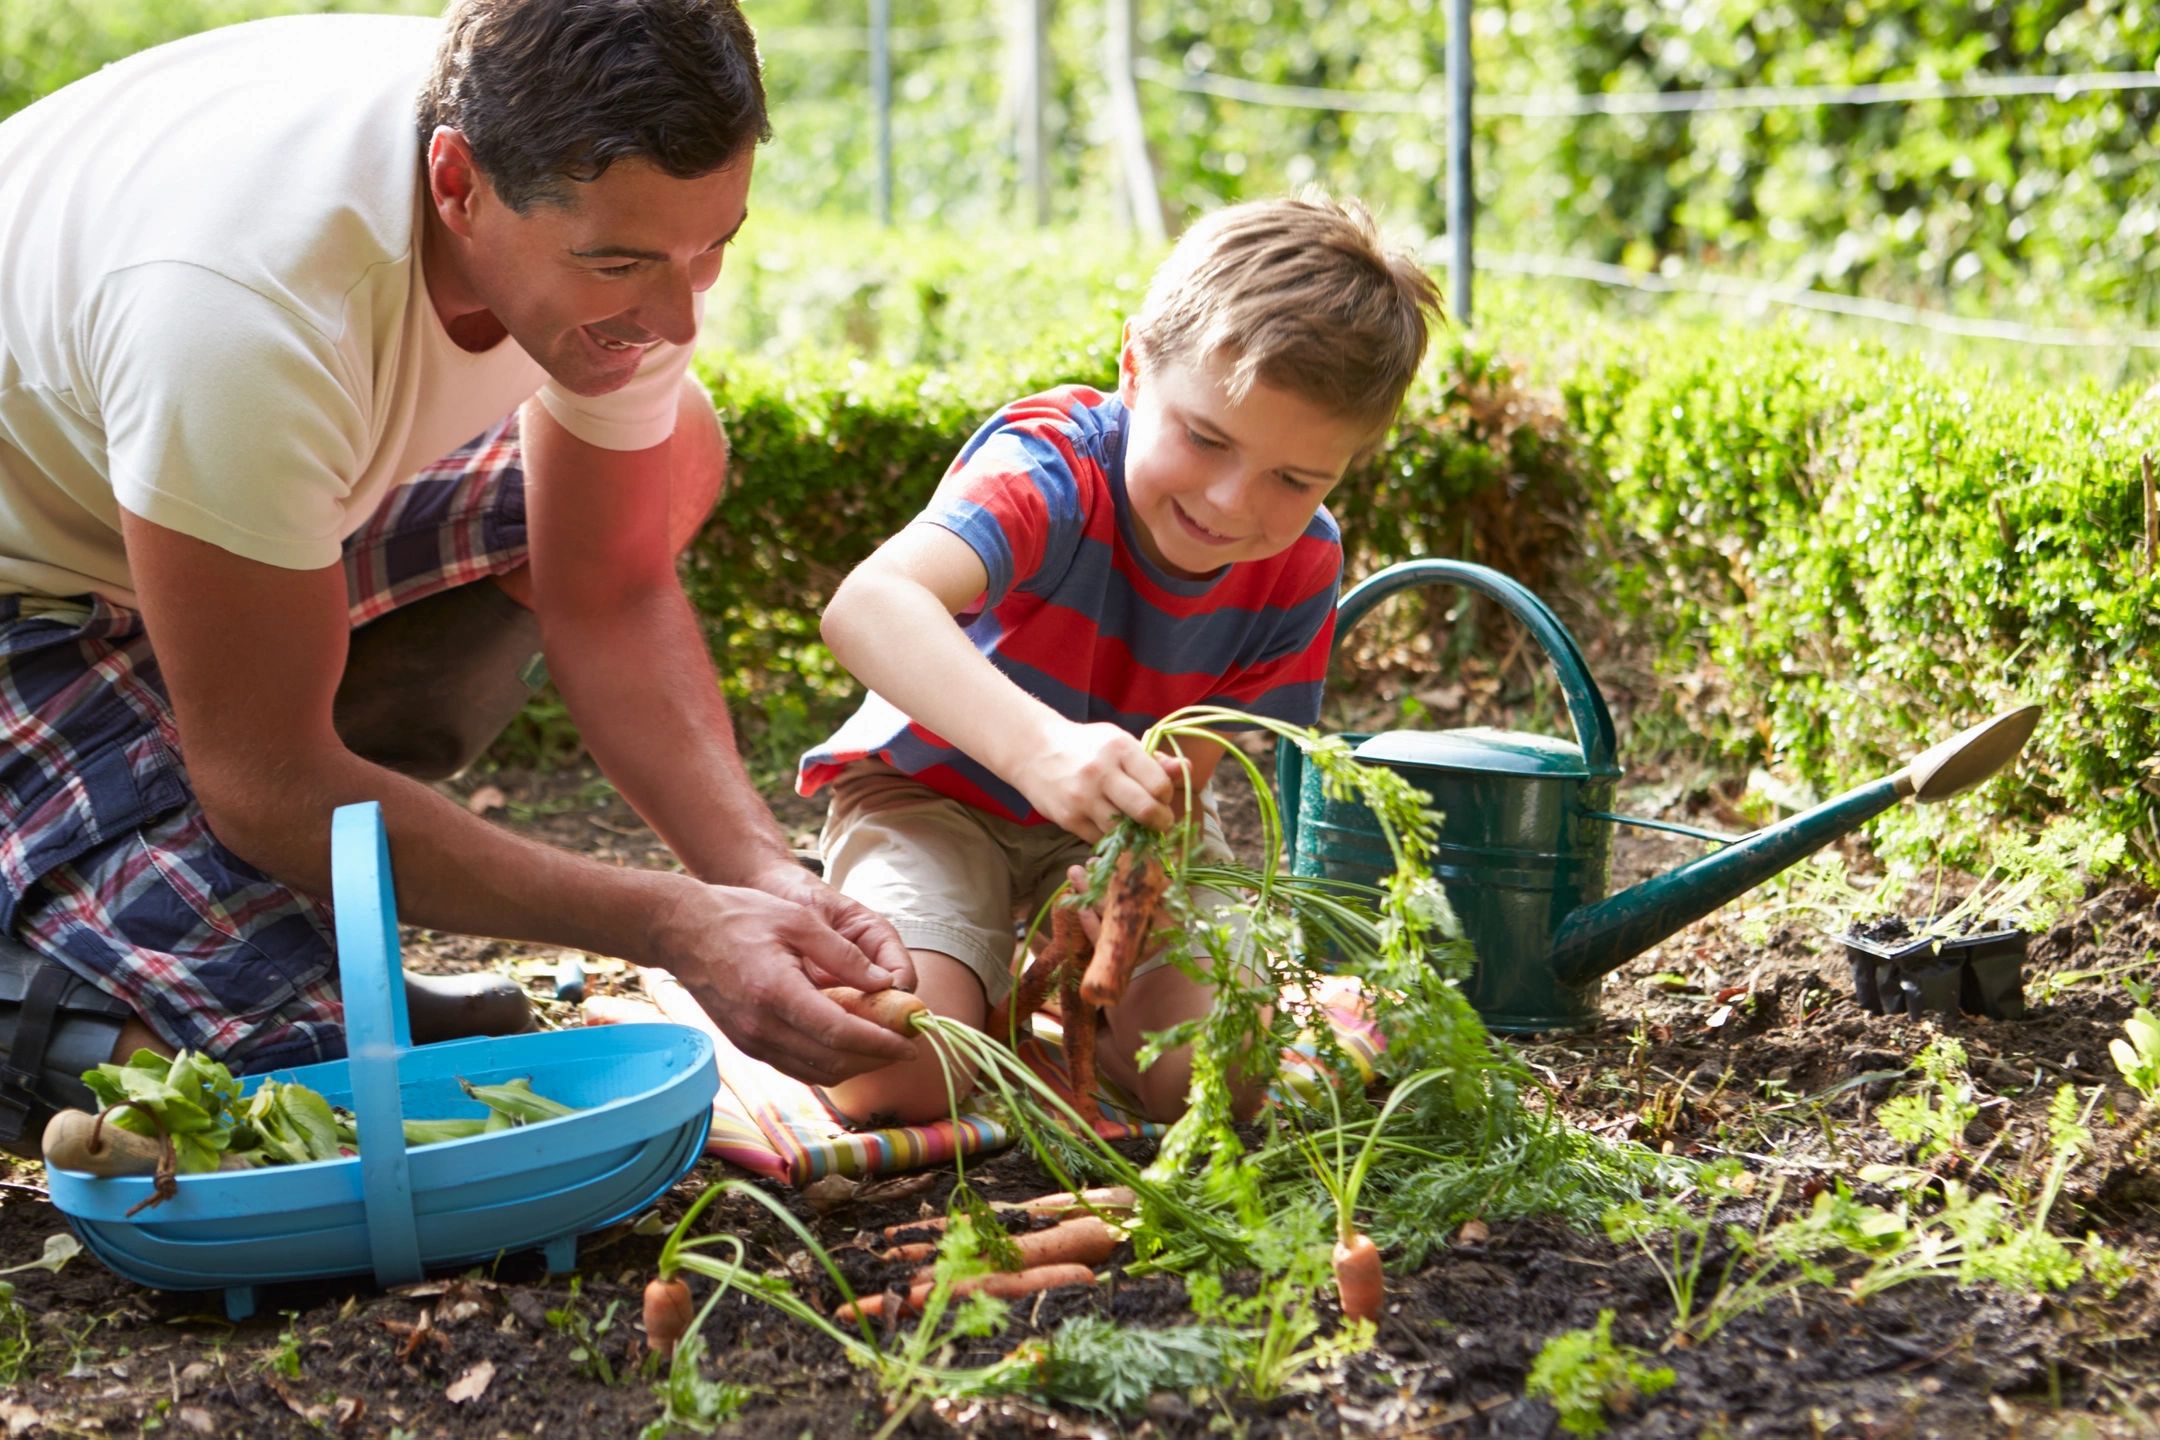 Father and son harvesting carrots in a garden